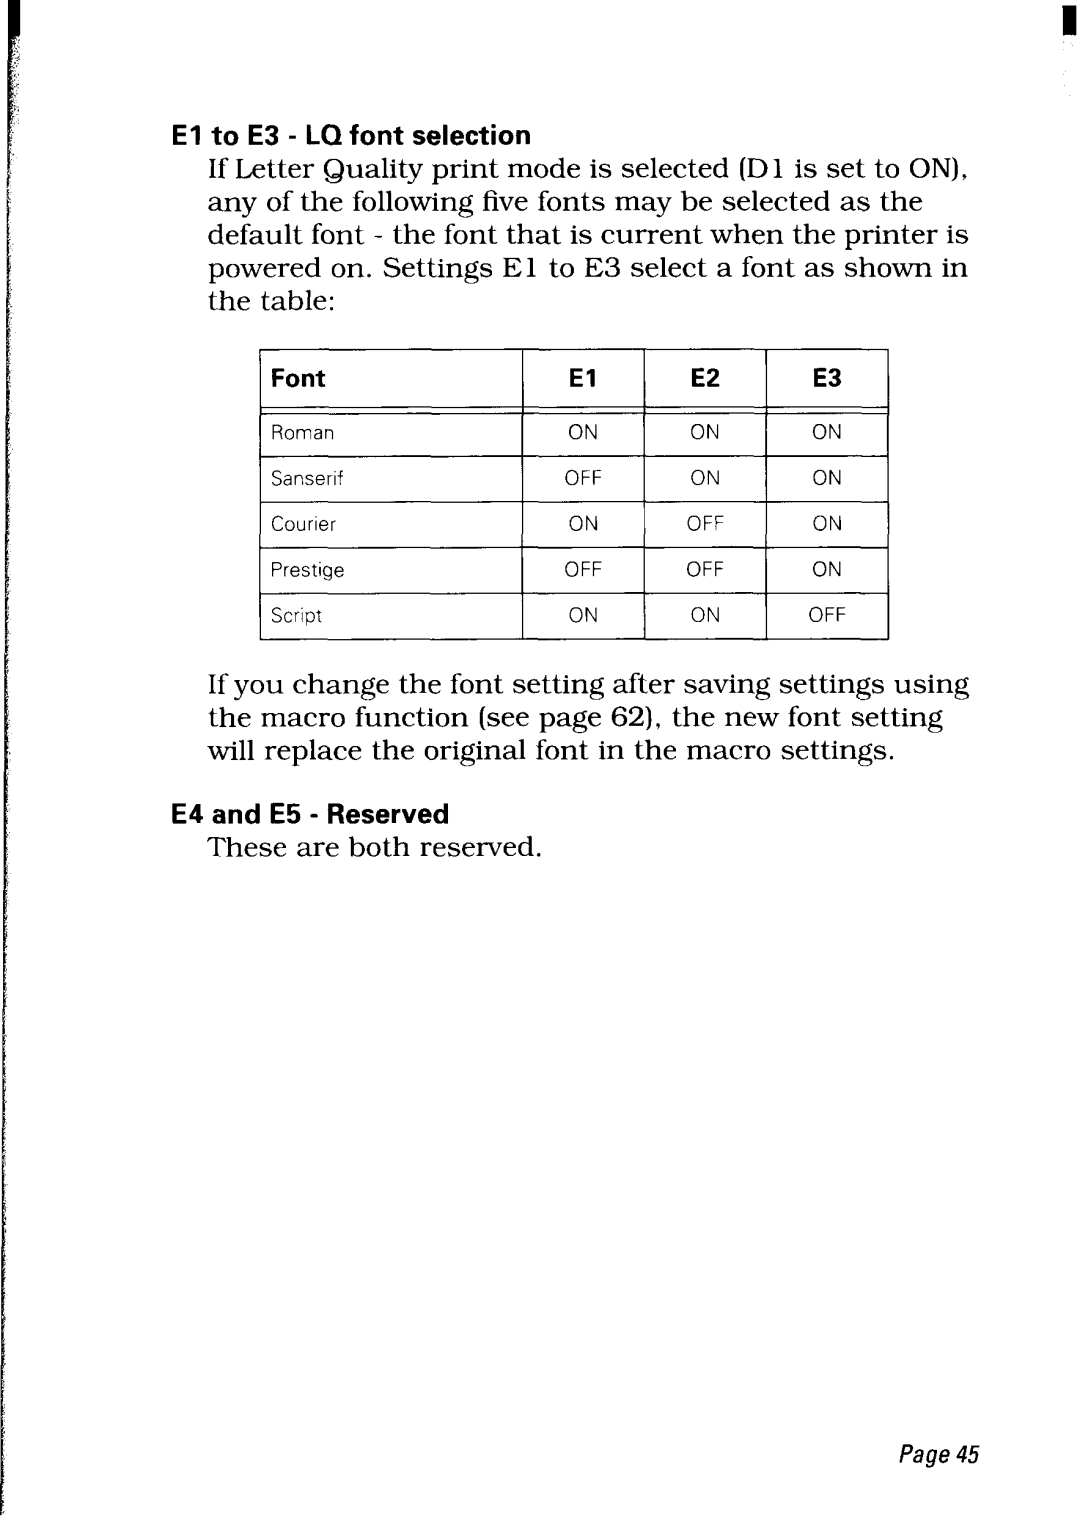 Star Micronics LC24-30 user manual El to E3 - LQ font selection, Font, E4 and E5 - Reserved 